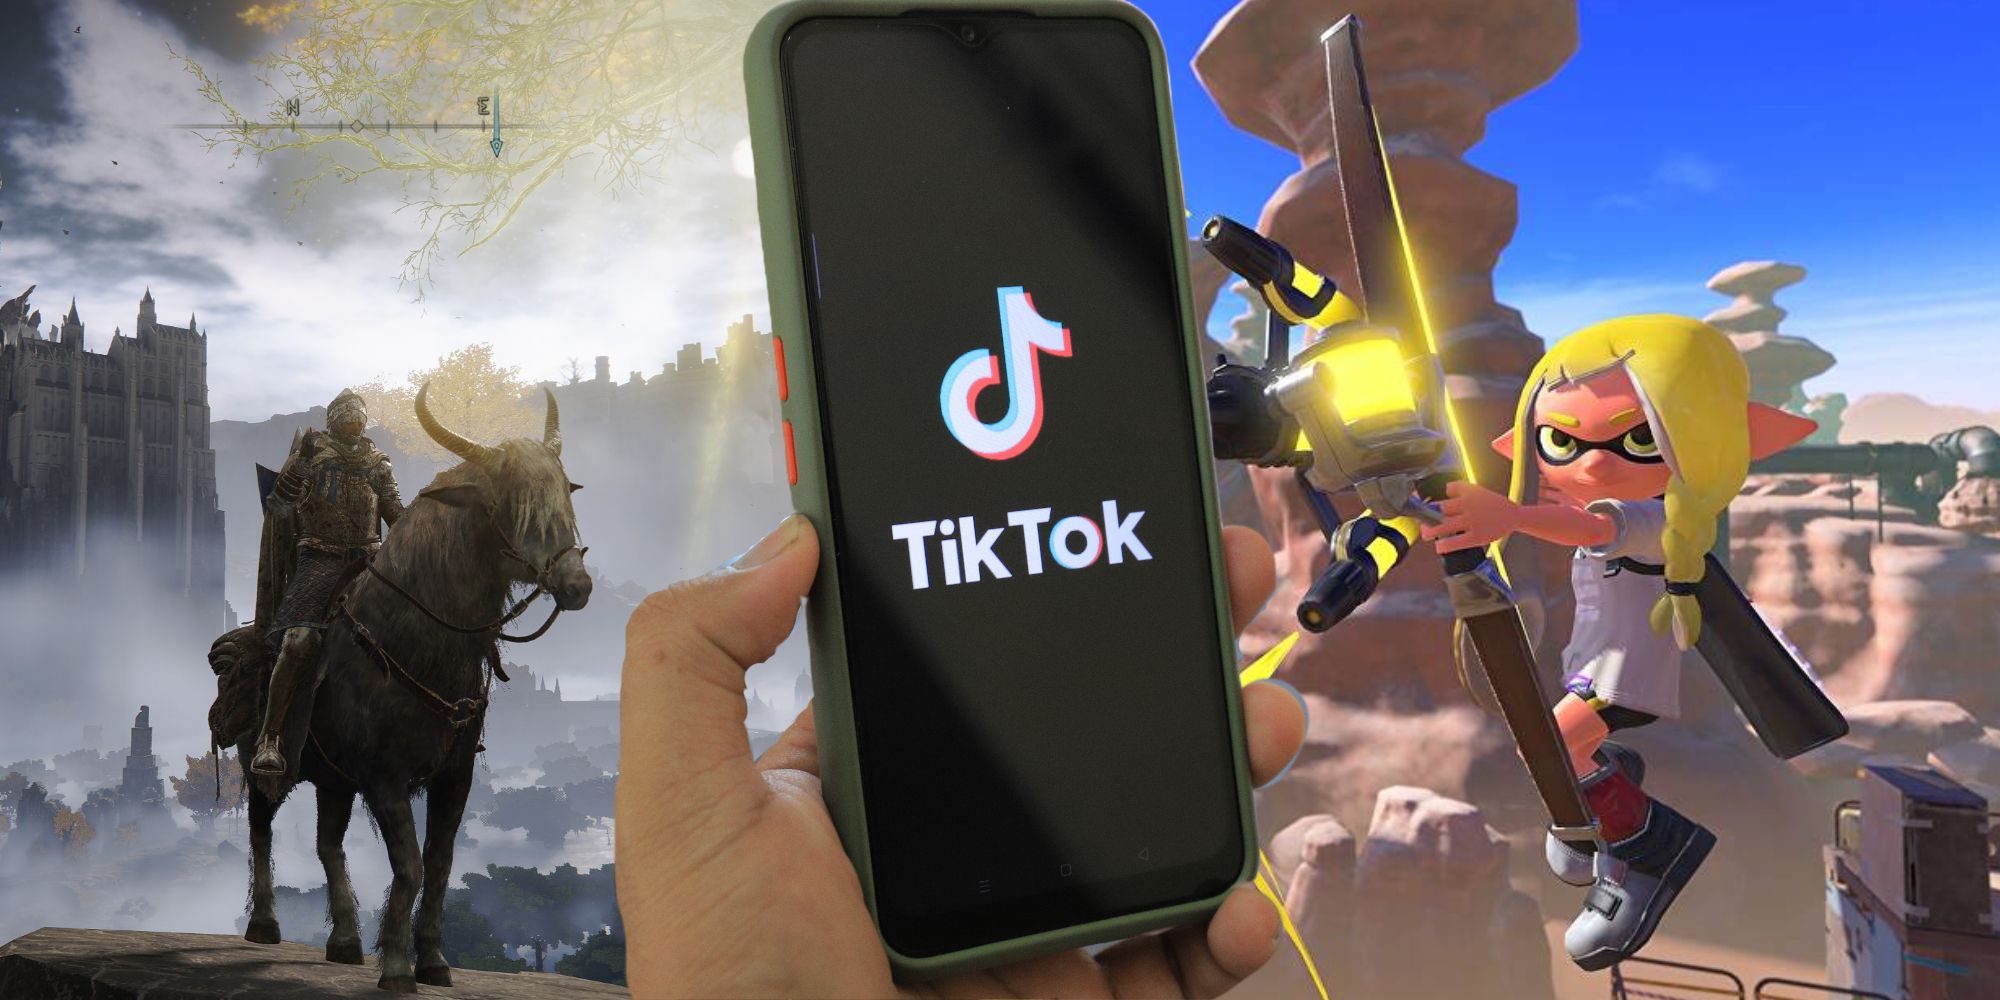 A phone with the TikTok logo is displayed beside in game images of Splatoon 3 and Elden Ring.